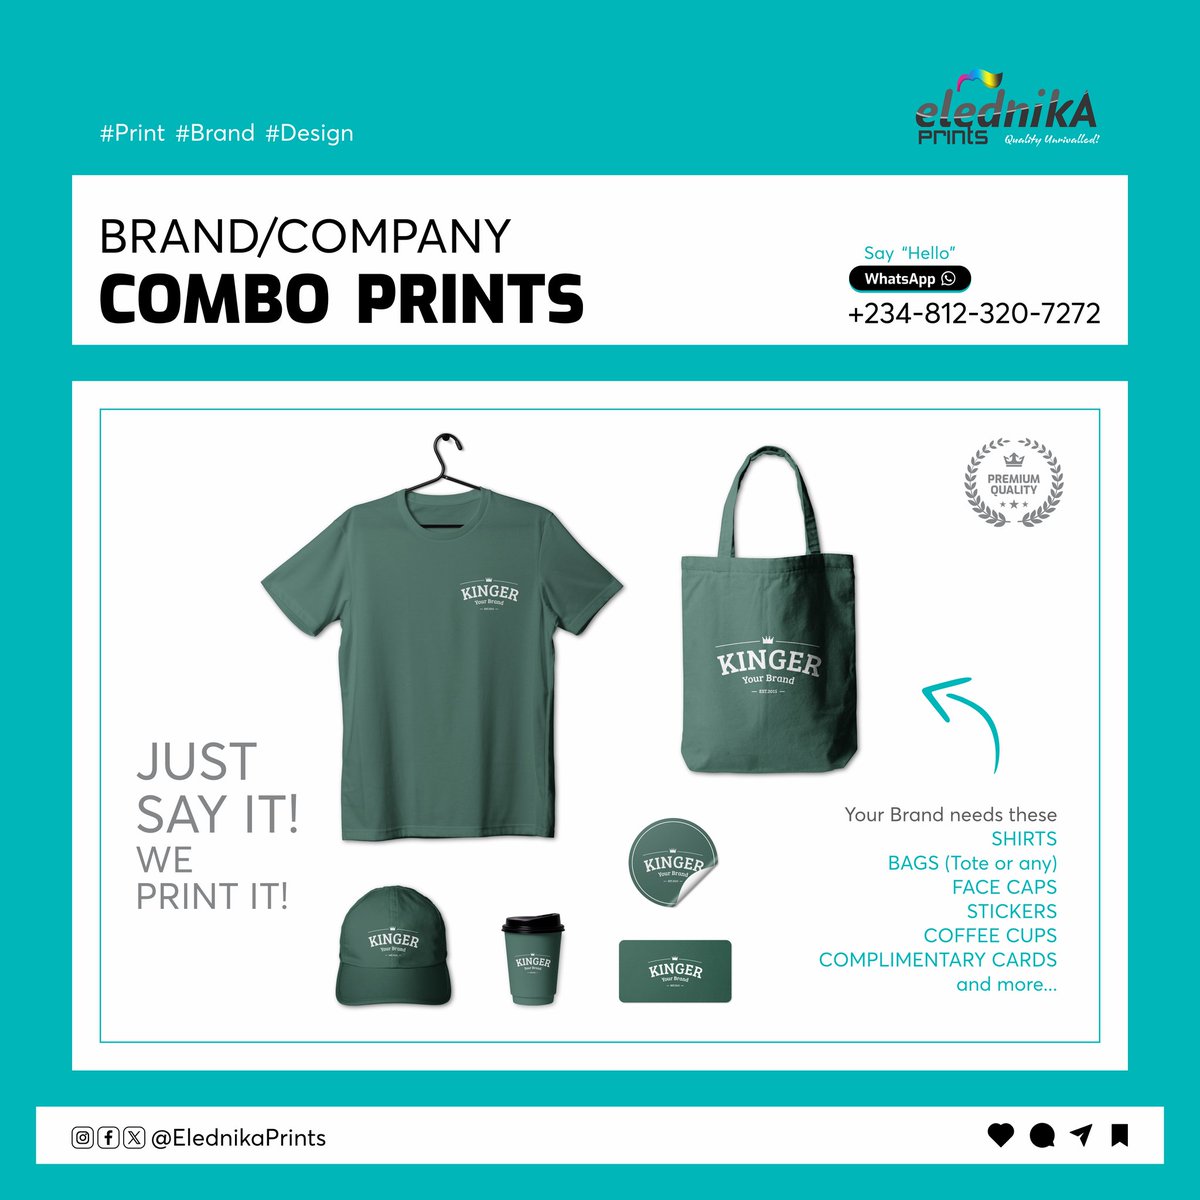 Unlock the Power of Print: Elevate Your Brand with the best printing, done @elednika_prints

Talk to us, what would you like to print?
Send a DM/WhatsApp/Call: +234 8123207272

#FaceCap #Stickers #DieCut #Shirts #BusinessCard #Coffeecups #Notepads #ToteBags #Branding #Printing